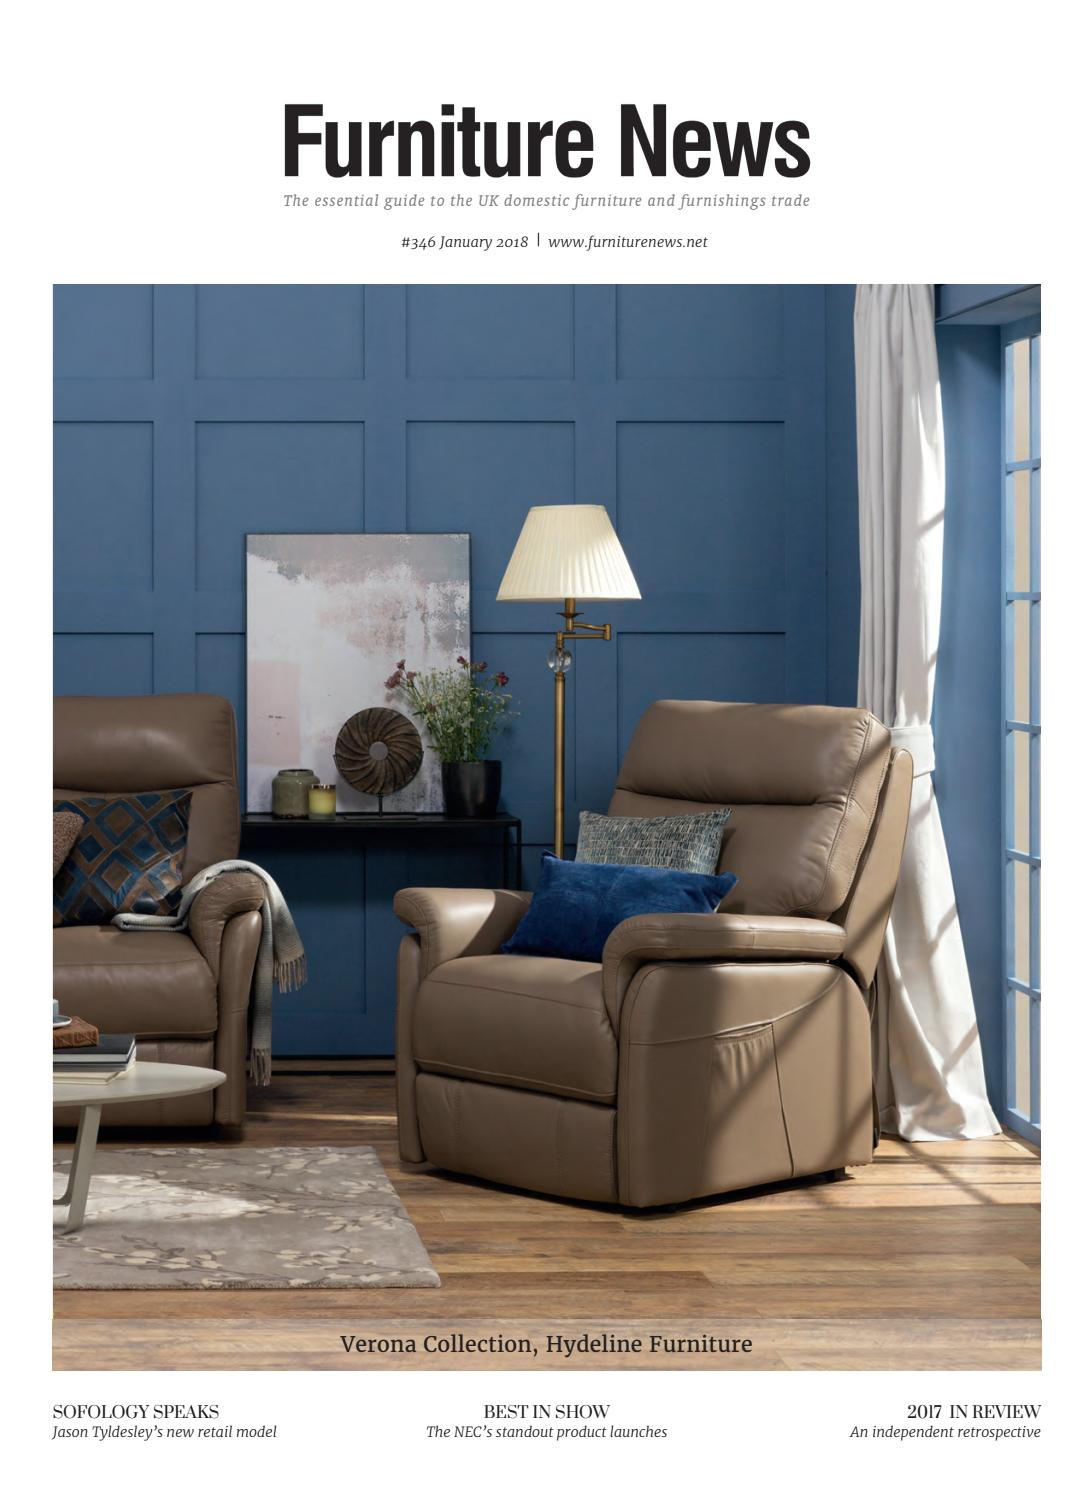 Hancock and Moore Reclining sofa Reviews Furniture News 346 by Gearing Media Group Ltd issuu